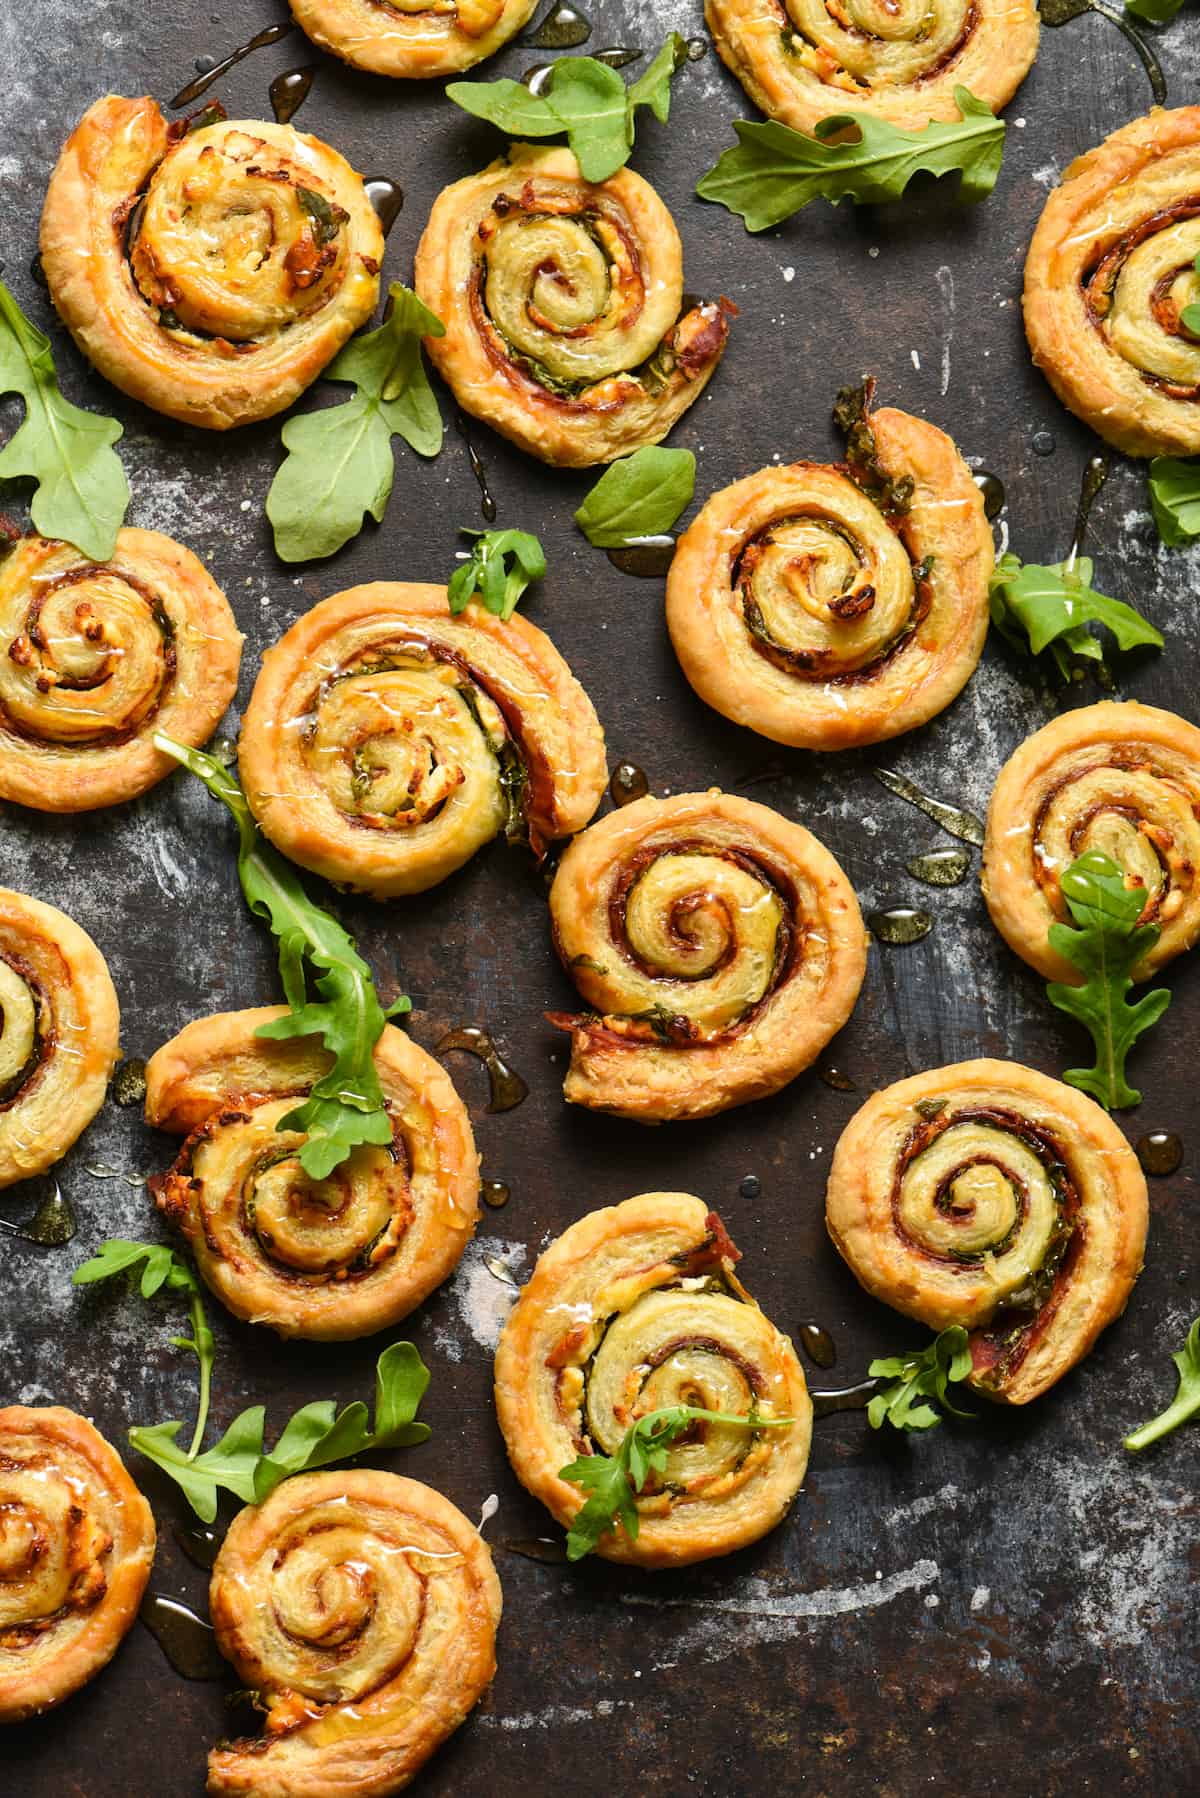 Salami & Goat Cheese Pinwheels with Honey - These easy appetizer bites are the perfect combination of savory, sweet, cheesy and crunchy! | foxeslovelemons.com